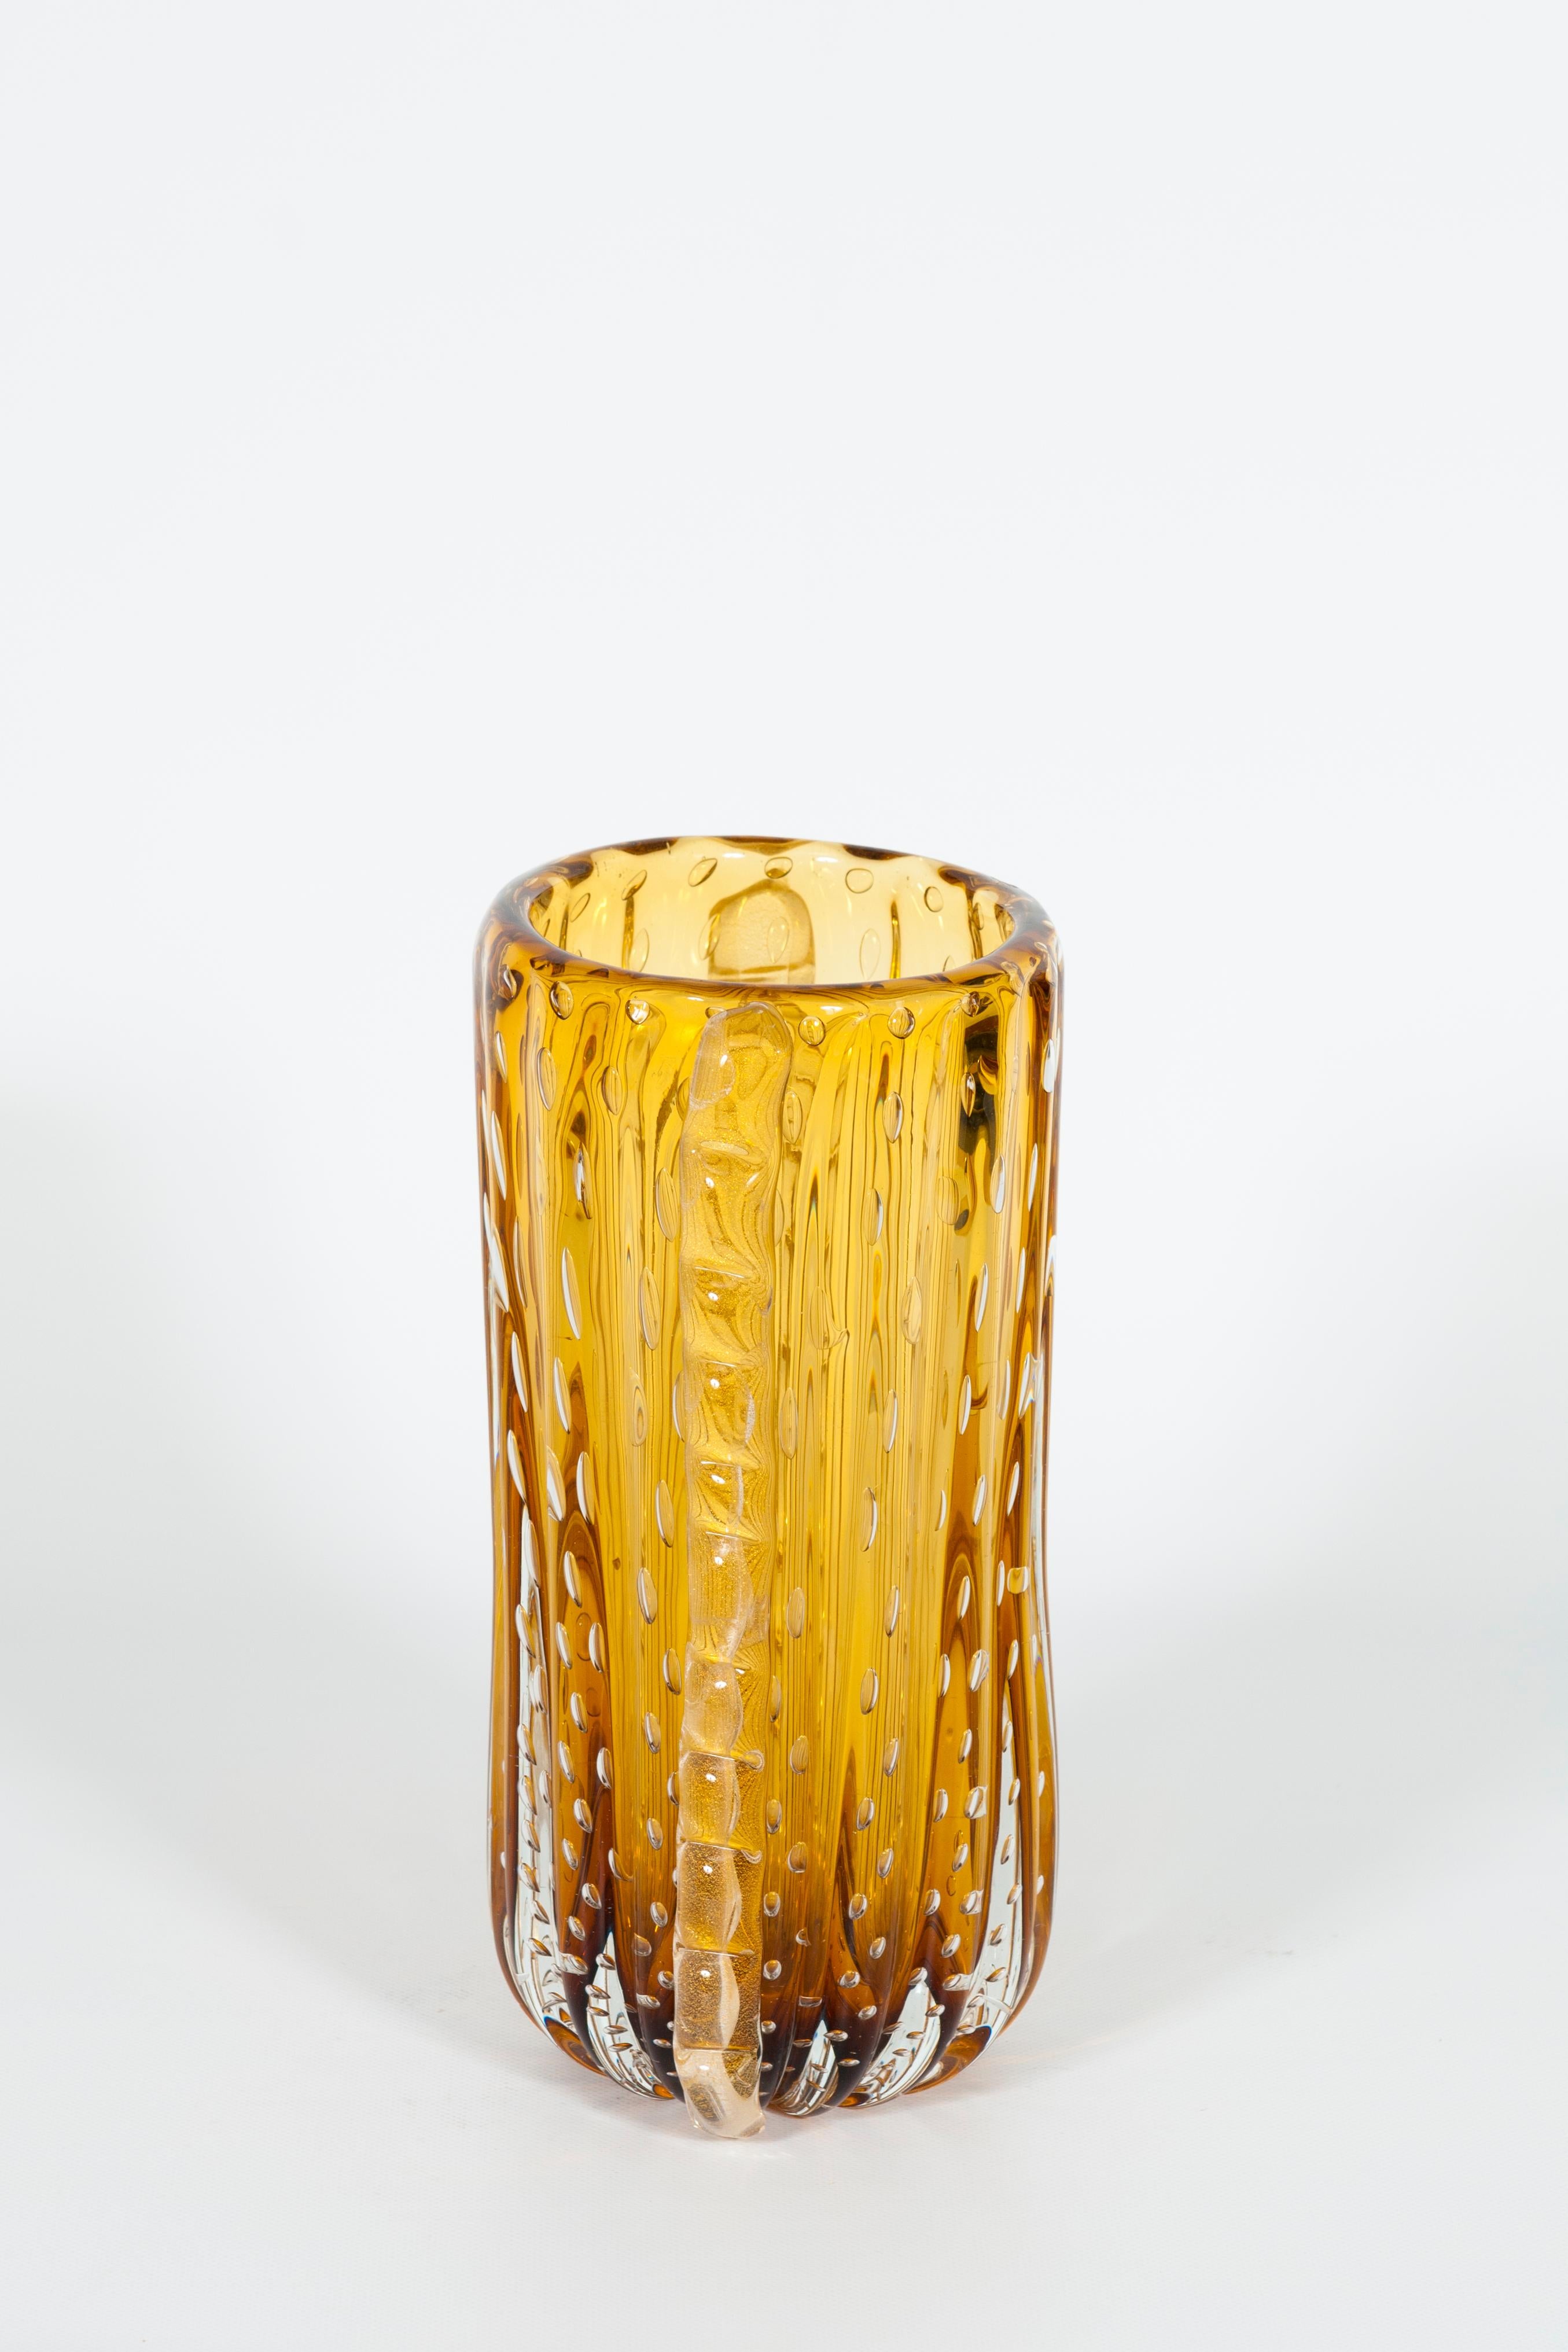 Amber Color Murano Glass Bubble Vase with Morise Attributed to Donà, 1980s Italy For Sale 1